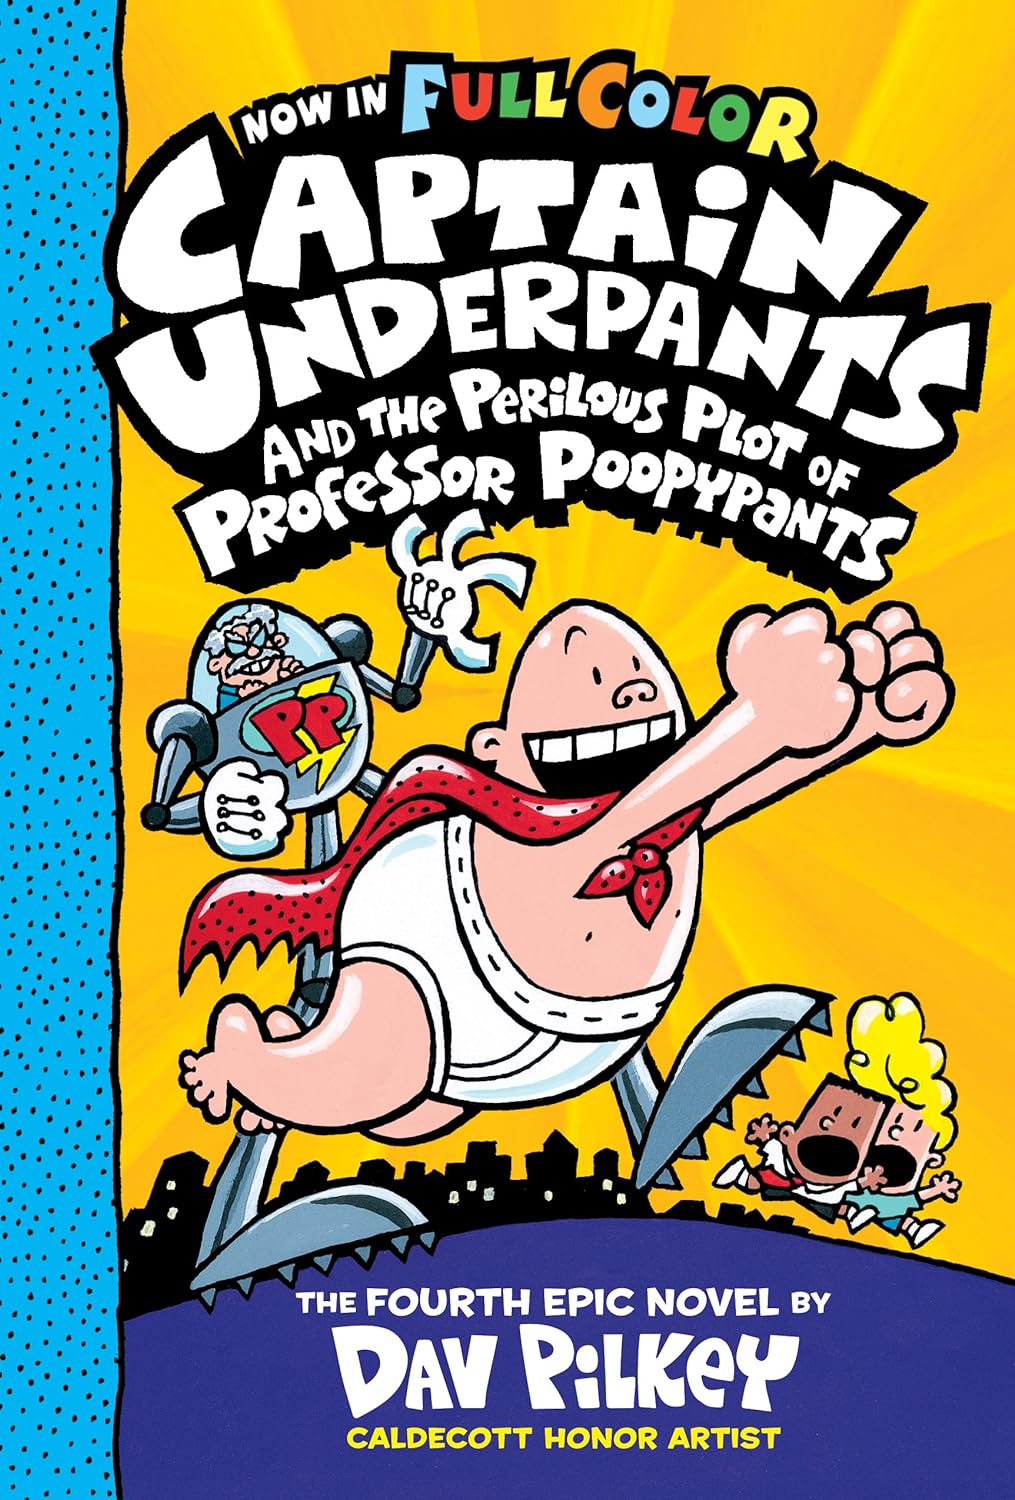 Captain Underpants and the Perilous Plot of Professor Poopypants: Color Edition (Captain Underpants #4) Hardcover – Illustrated, December 29, 2015